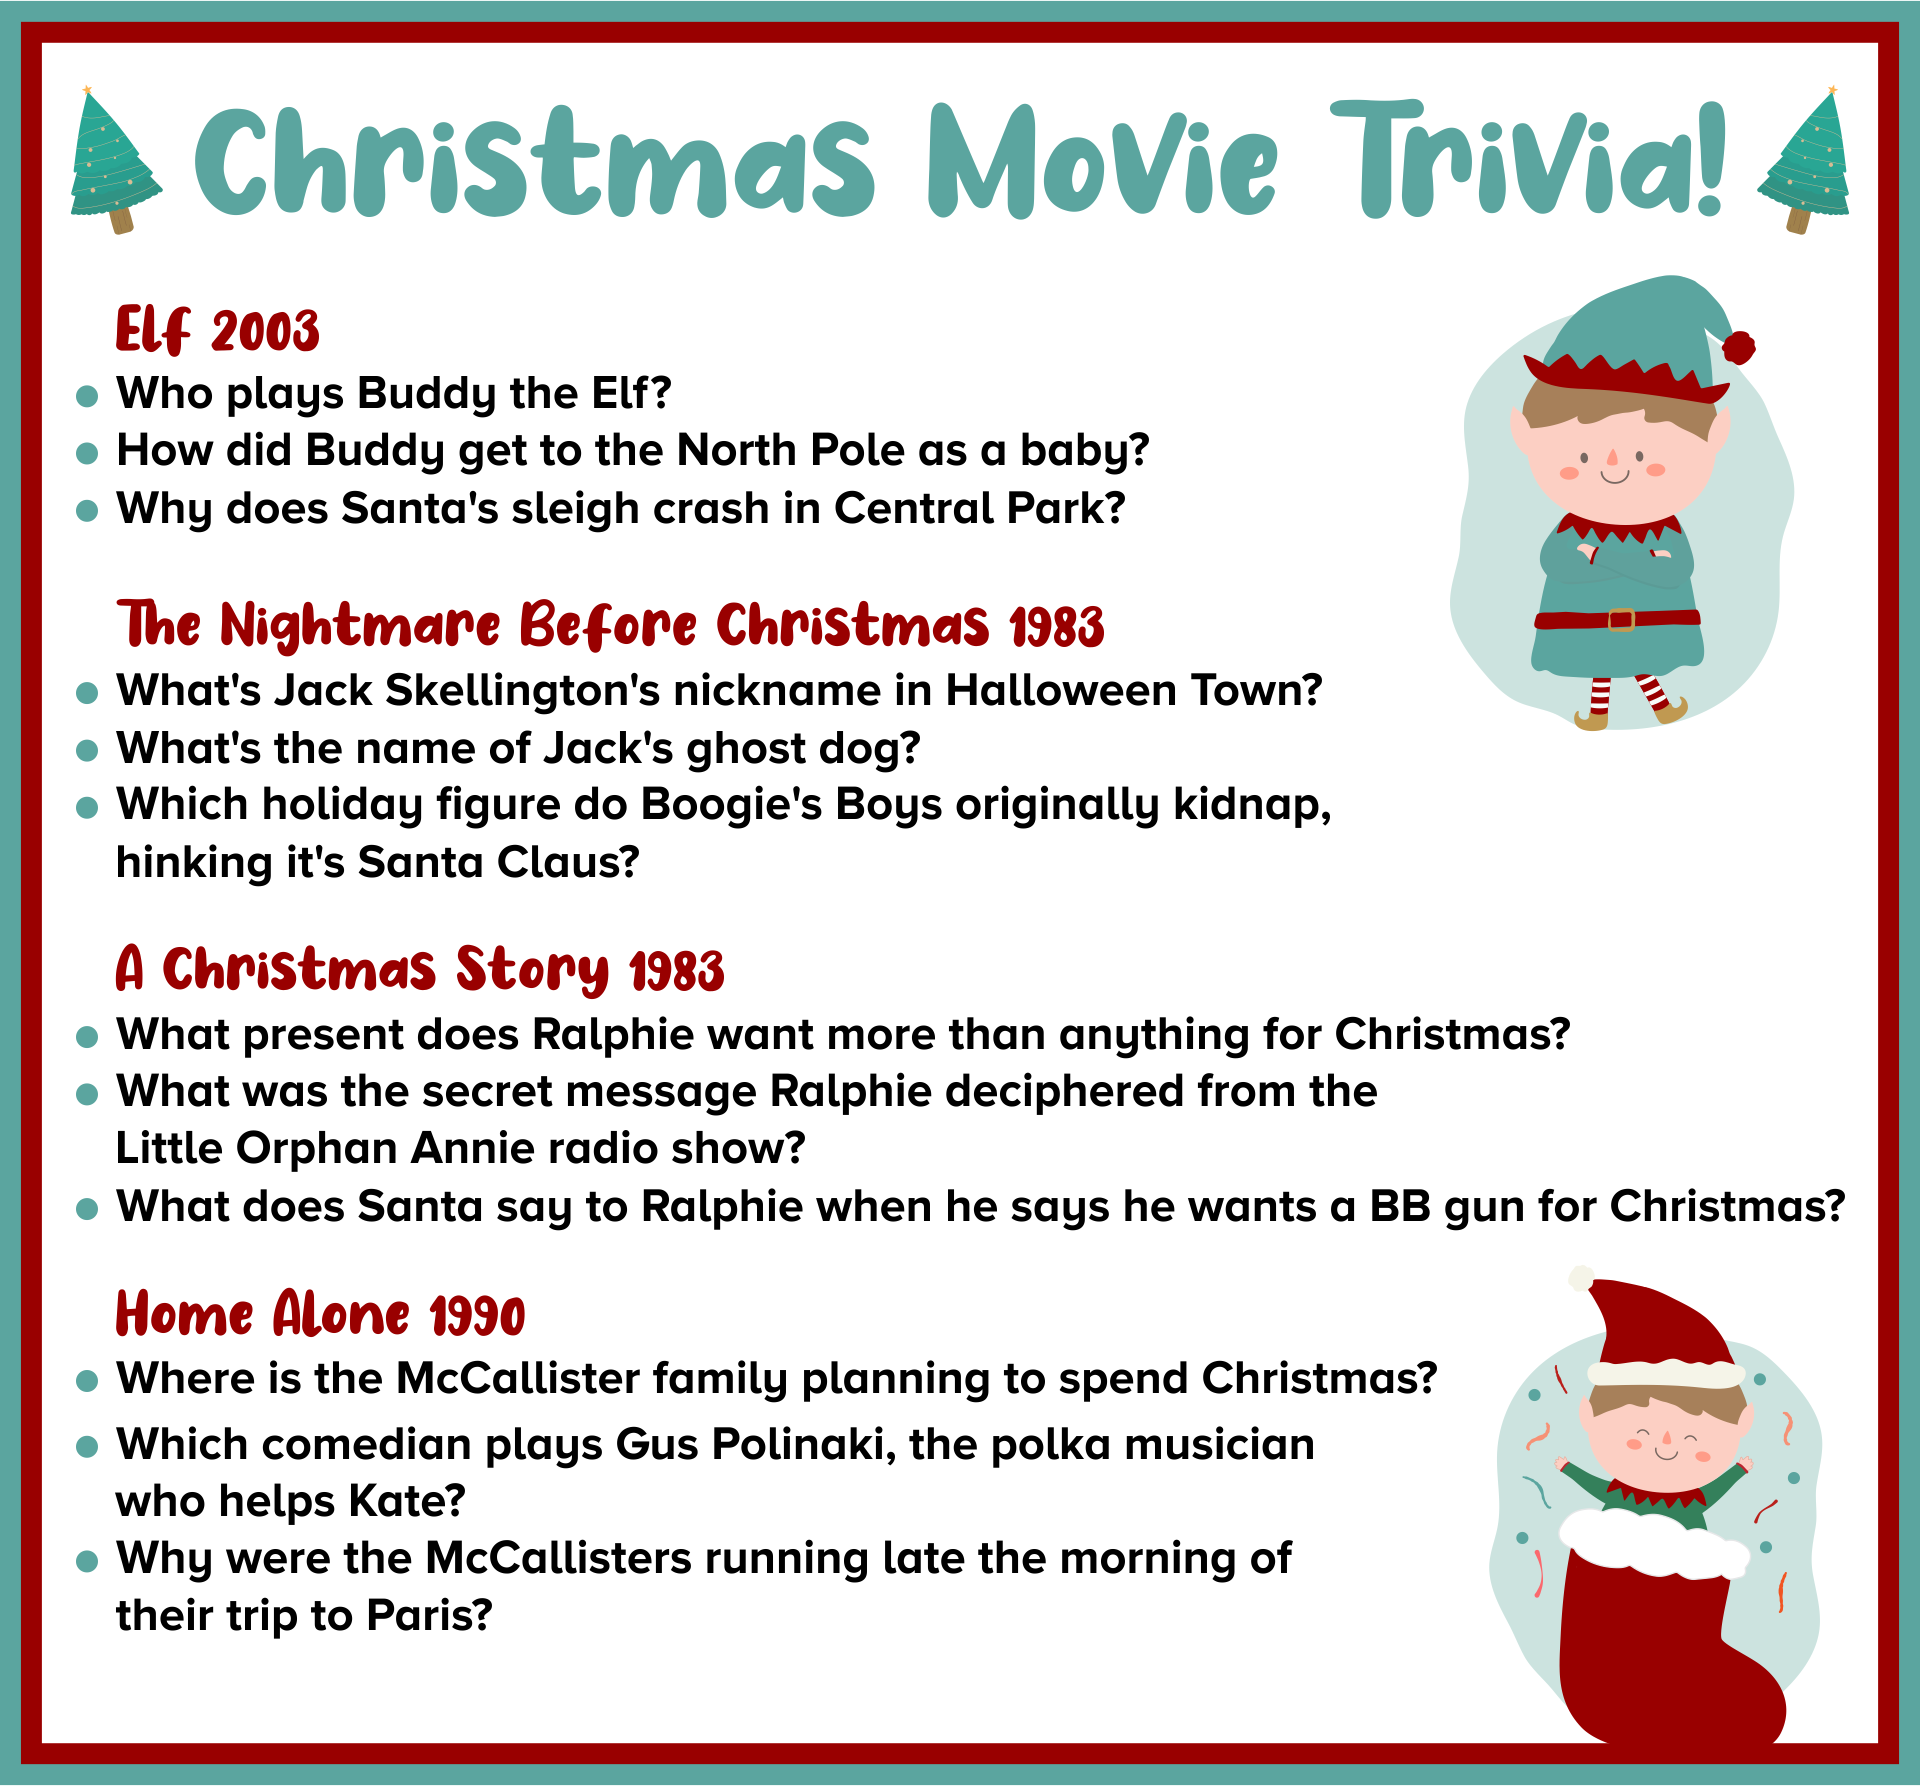 Elf Movie Trivia Questions Answers Is siri good enough to help bill